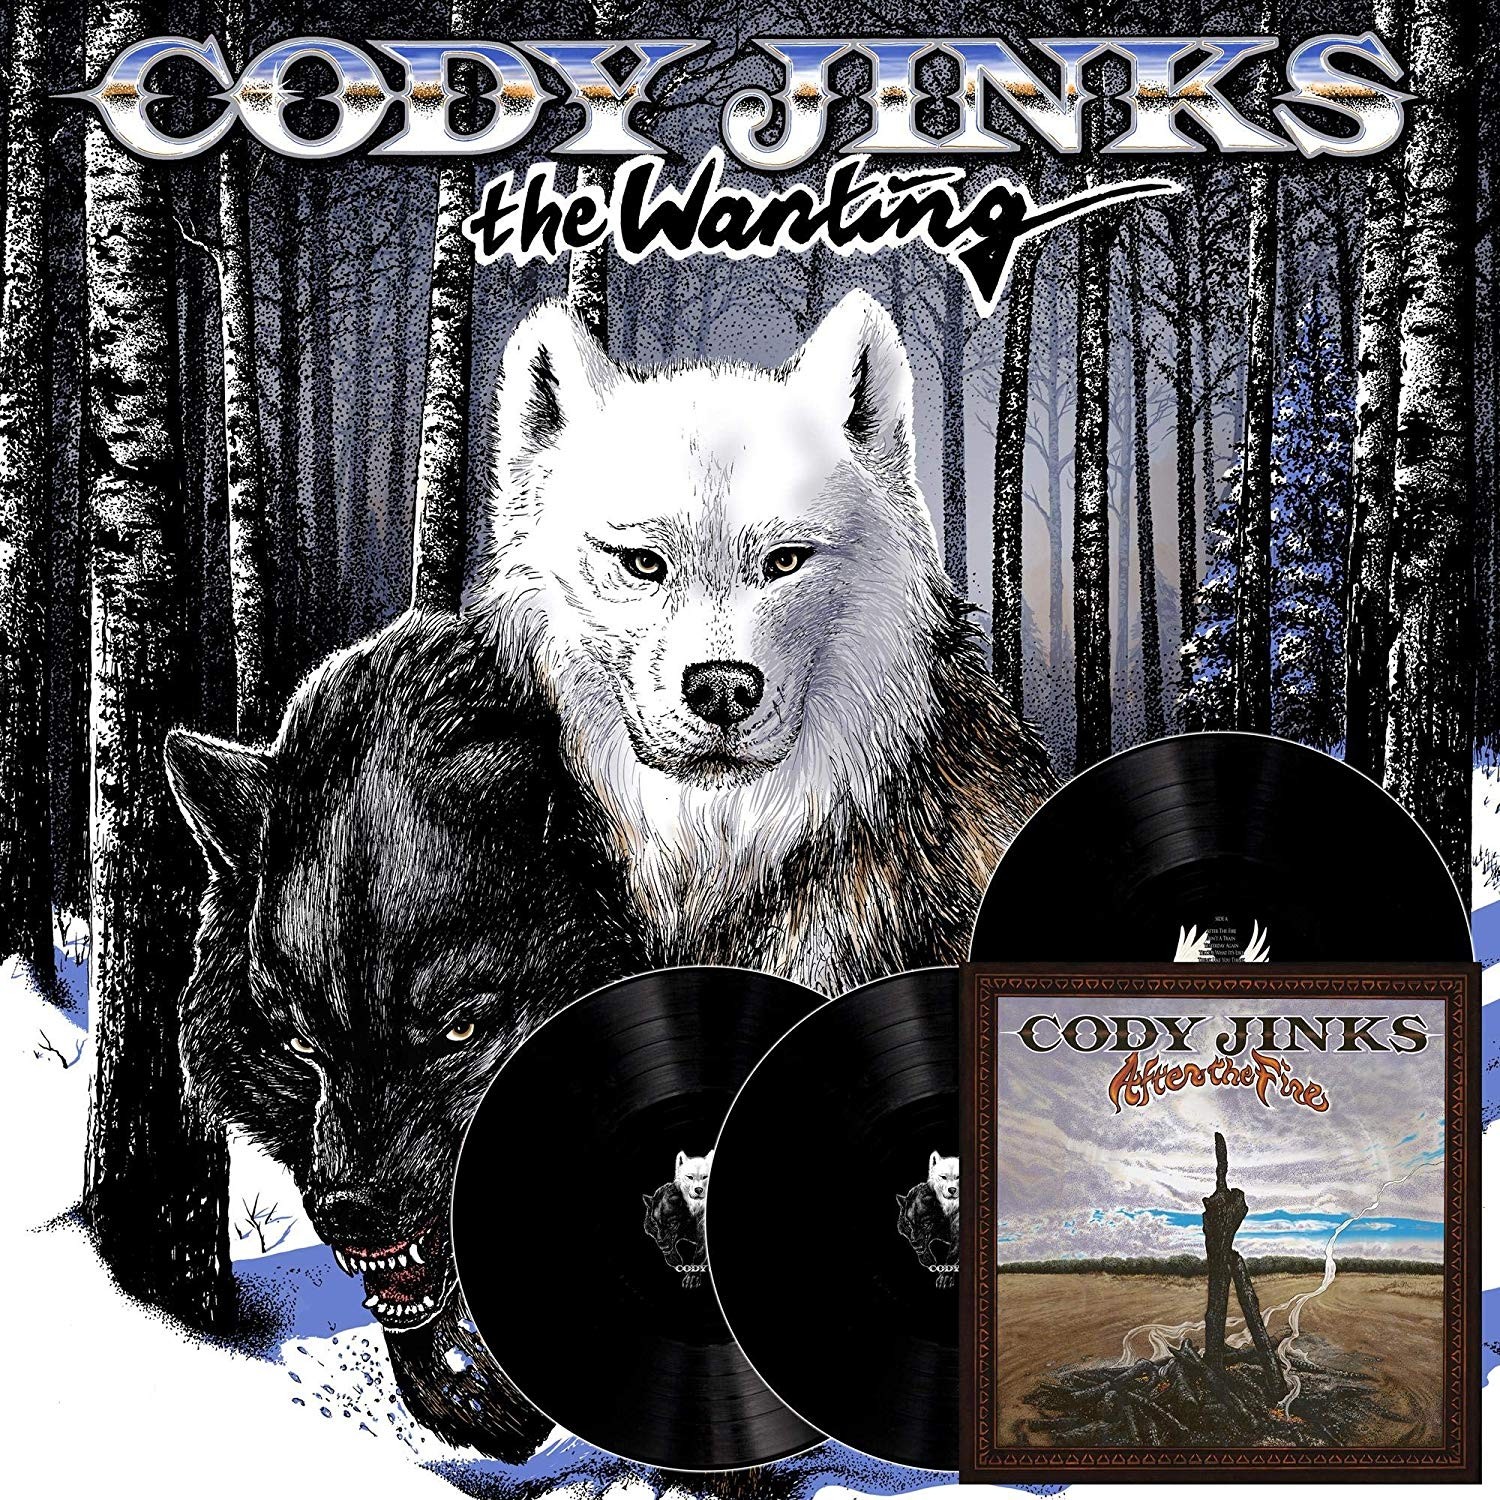 Cody Jinks - Wanting After The Fire (Black) 3XLP